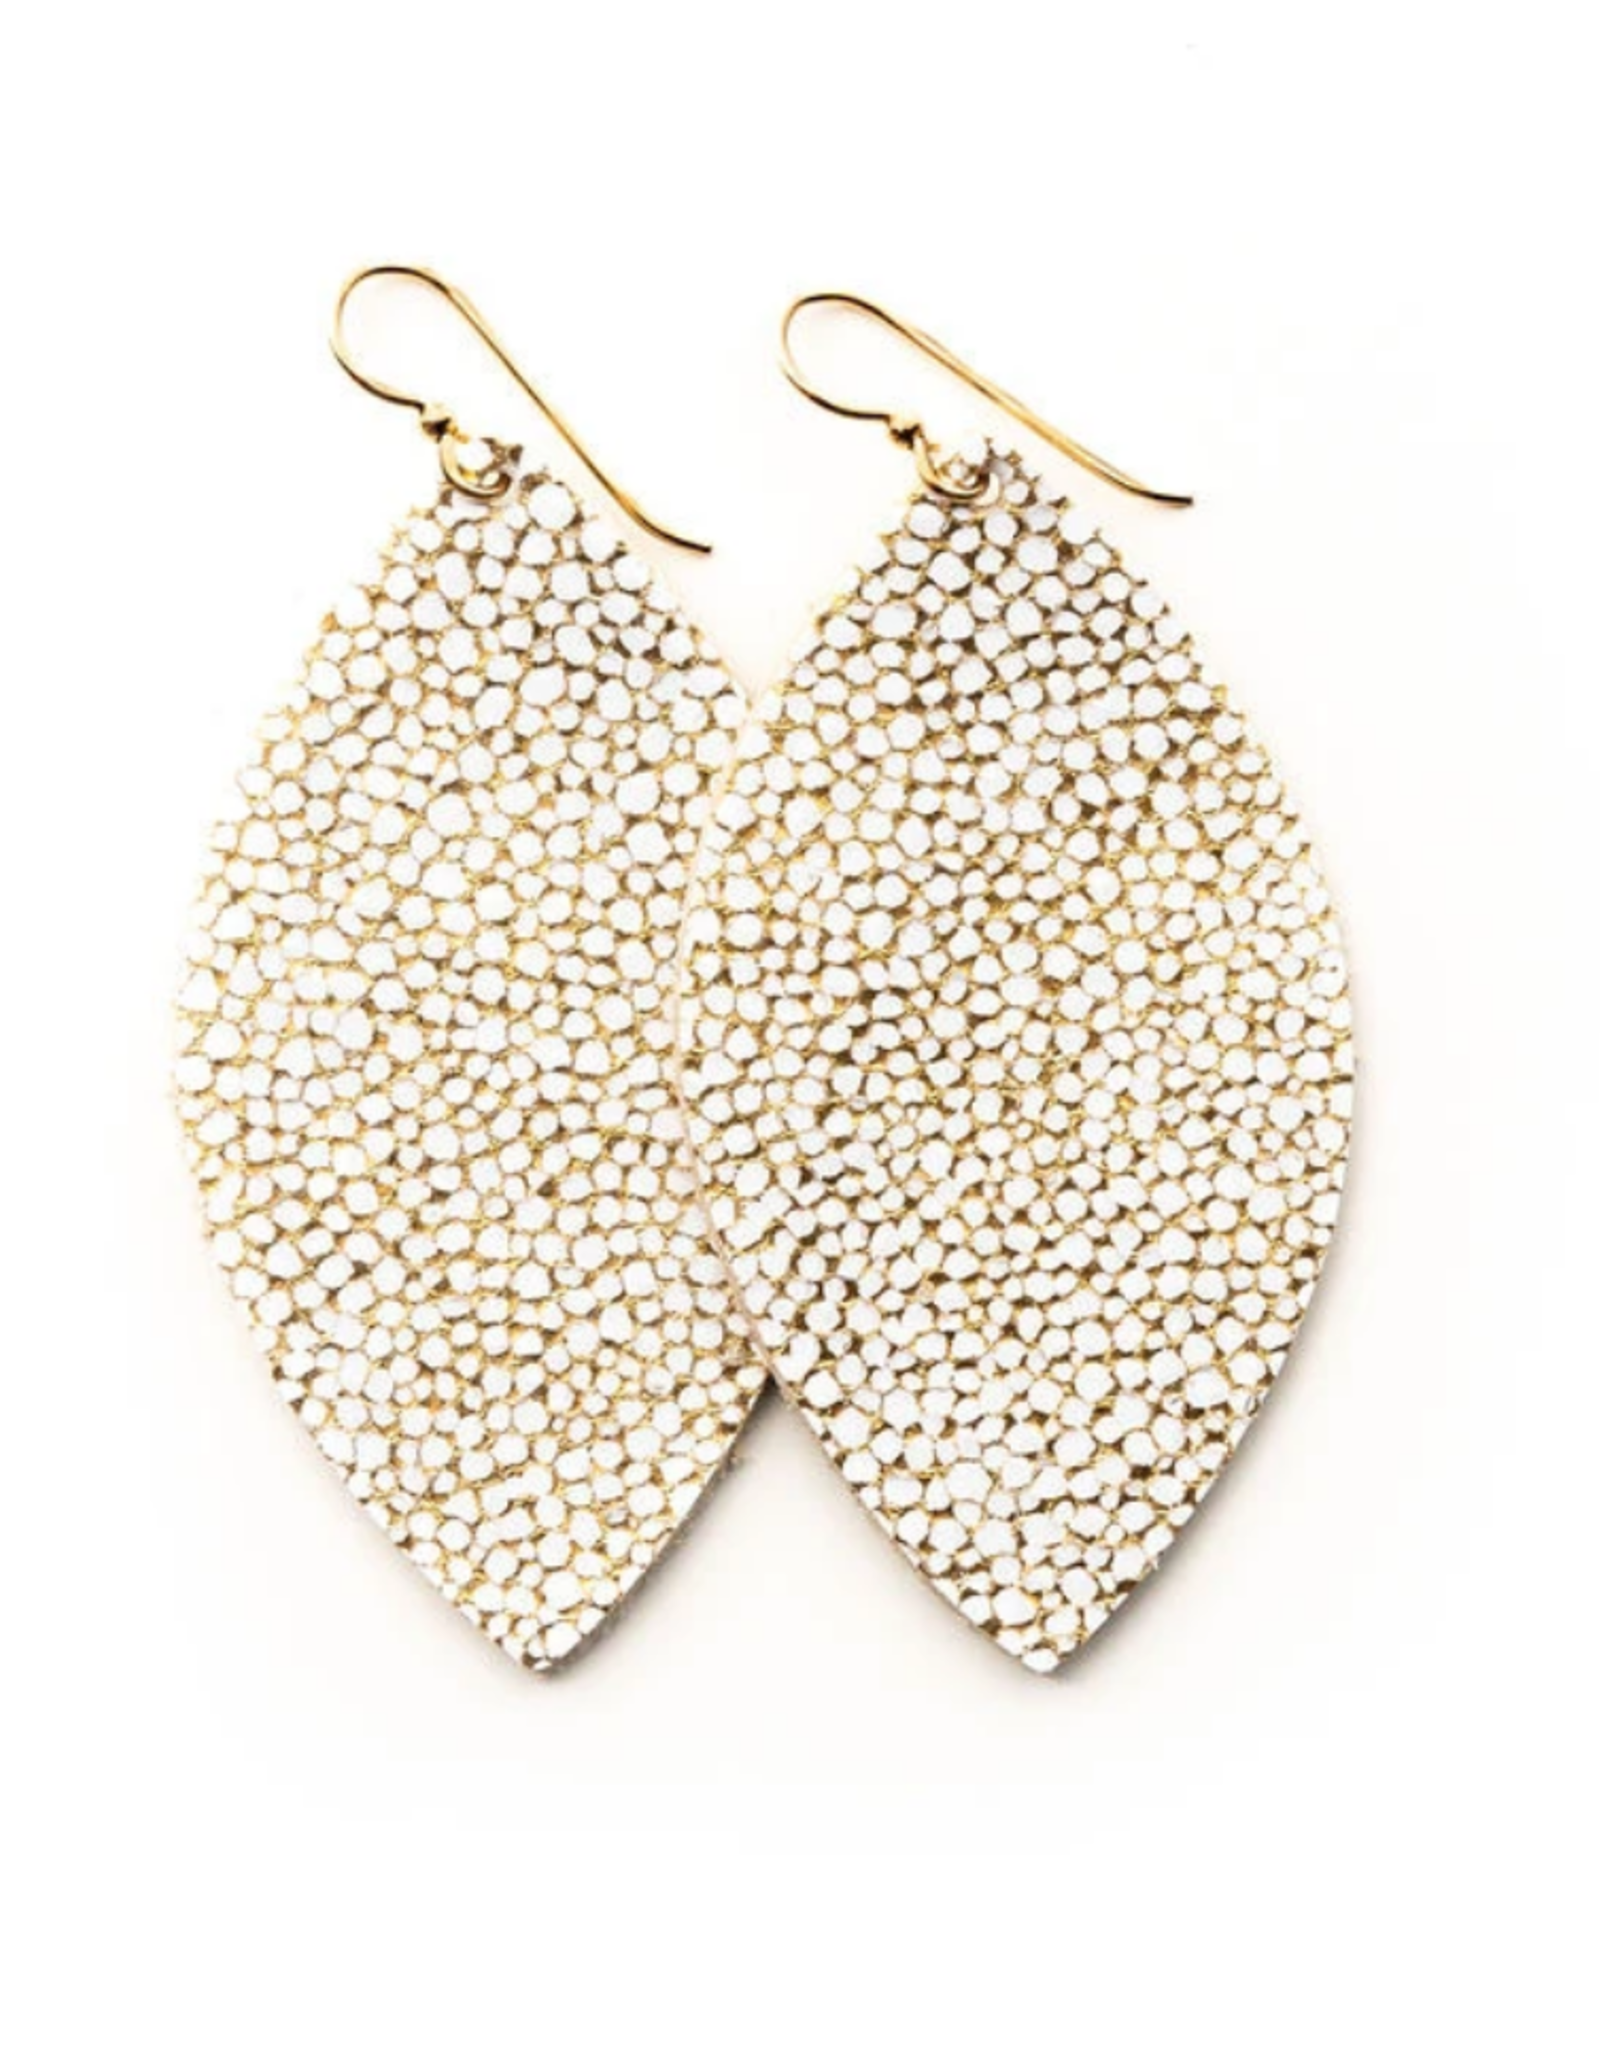 Keva - Earrings White and Gold Speckled